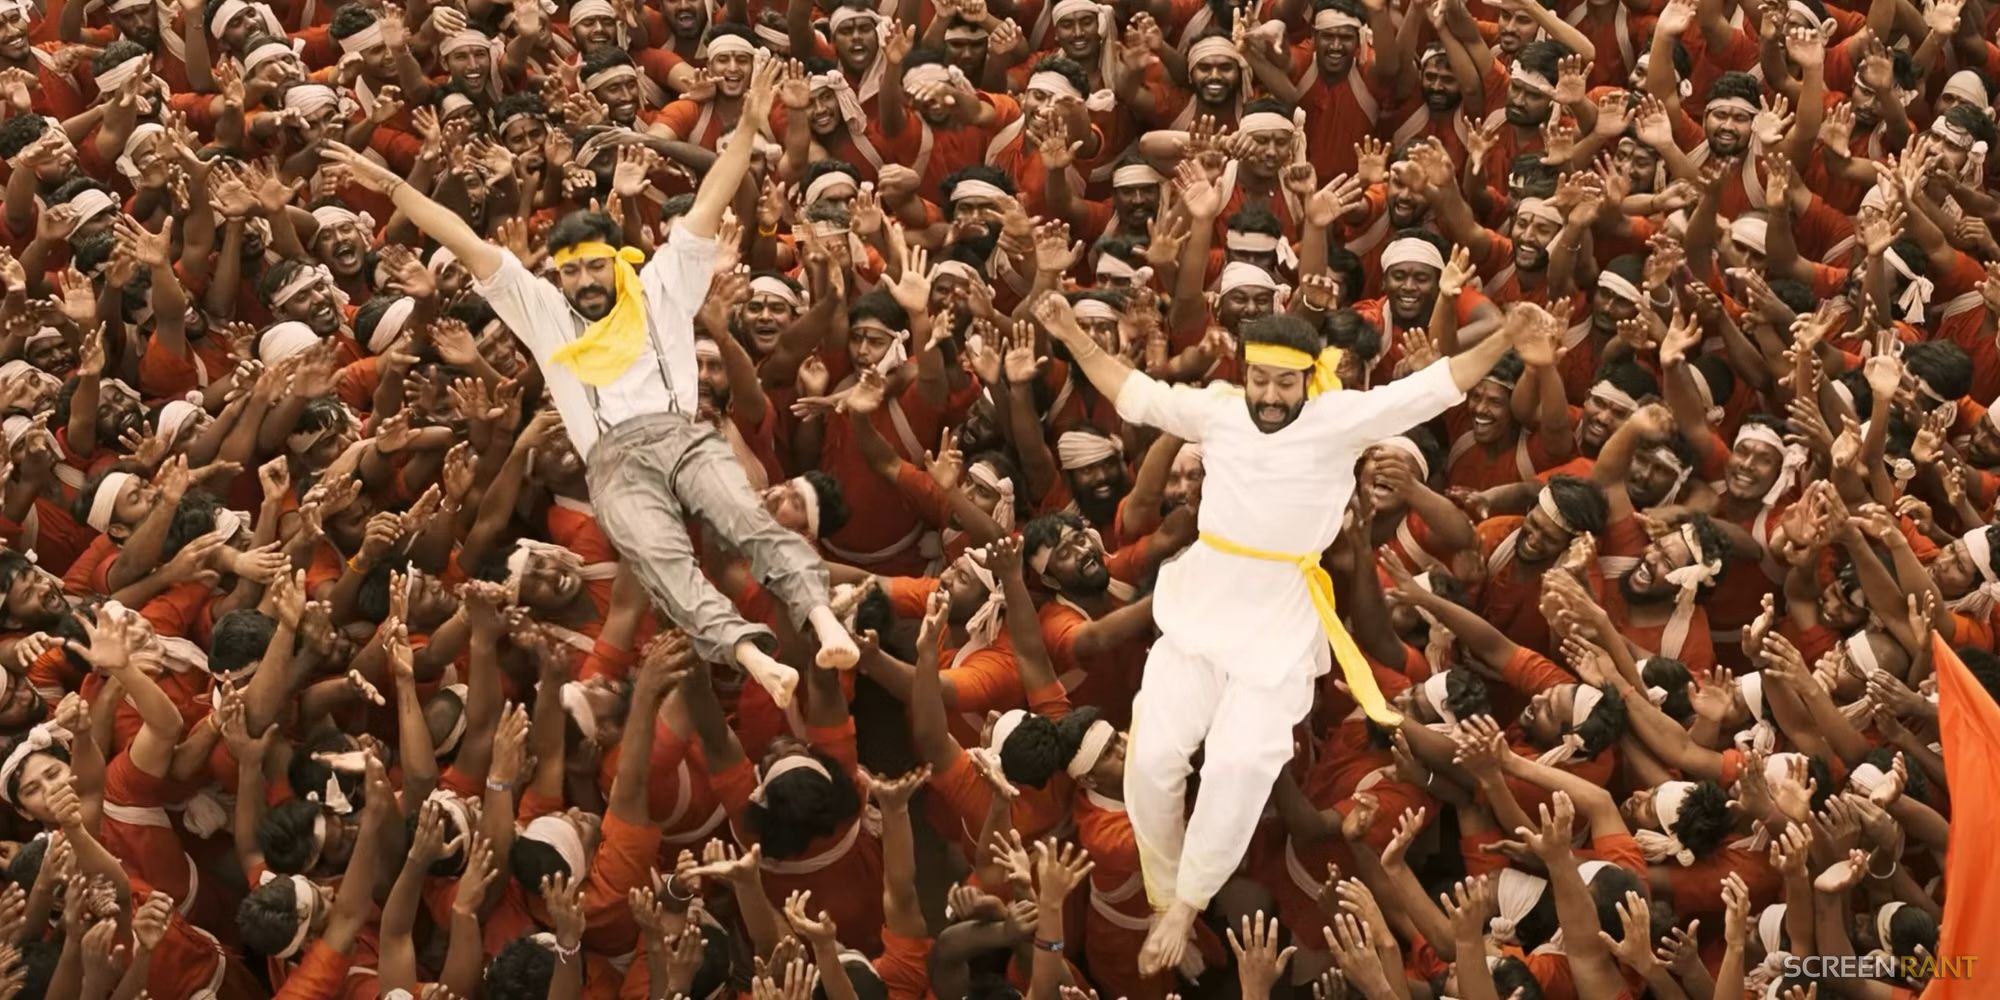 Raju and Bheem being lifted by a crowd in RRR Movie